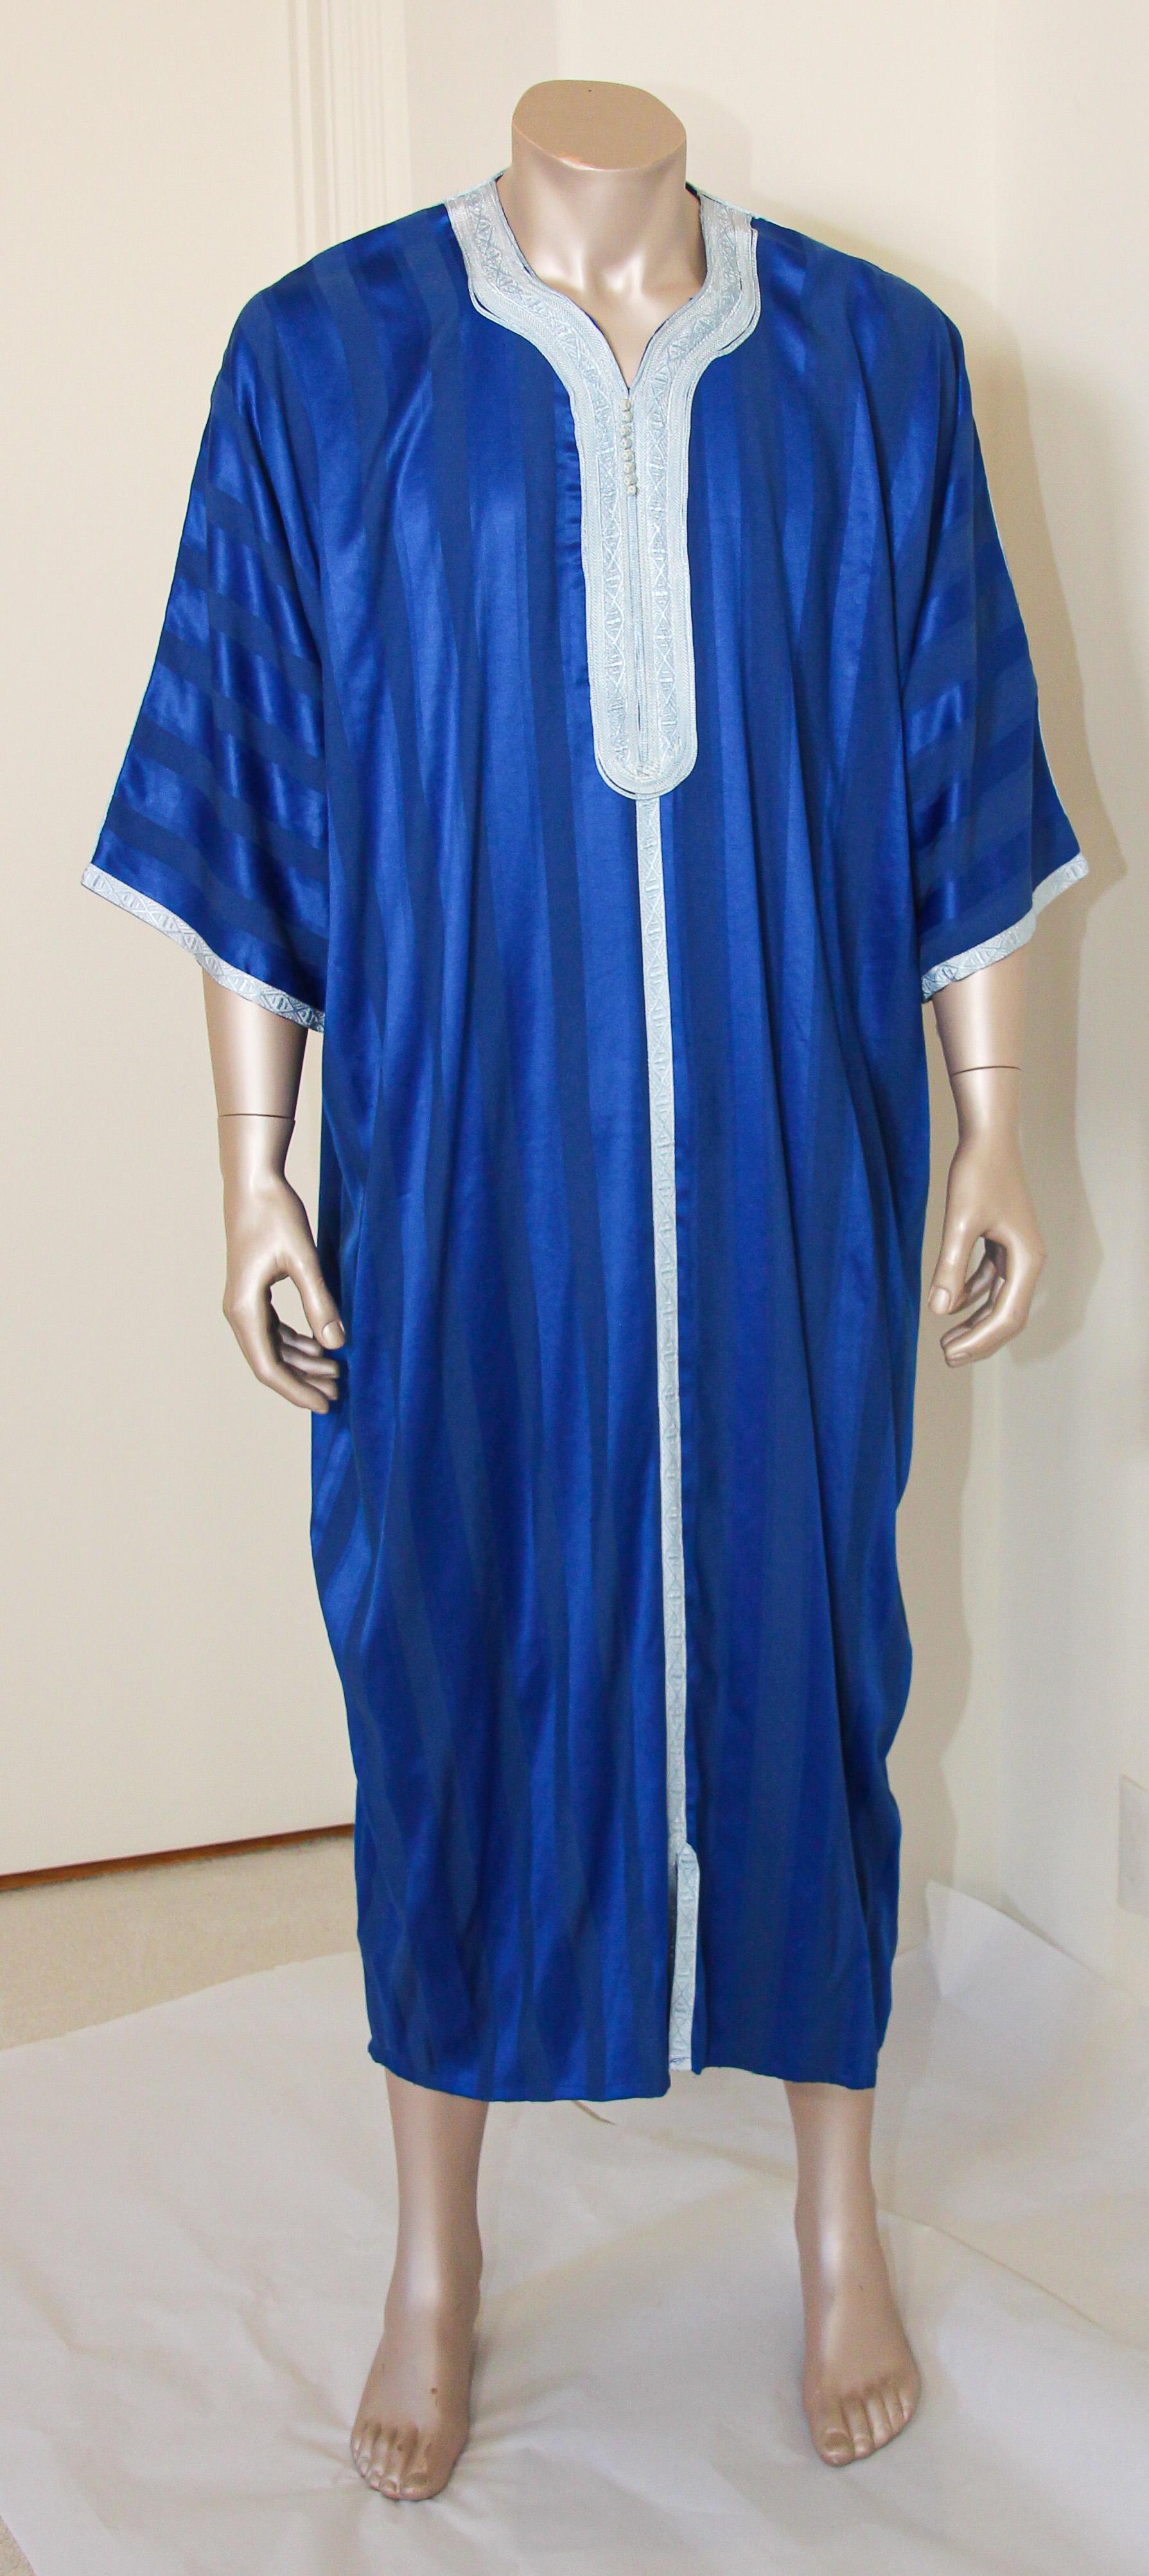 Moroccan gentleman vintage royal blue caftan embellished with embroidered trim.
In Morocco, fashion preserves its traditional style inherited from great civilizations that found their way to Northwest Africa, such as the Ottomans and the